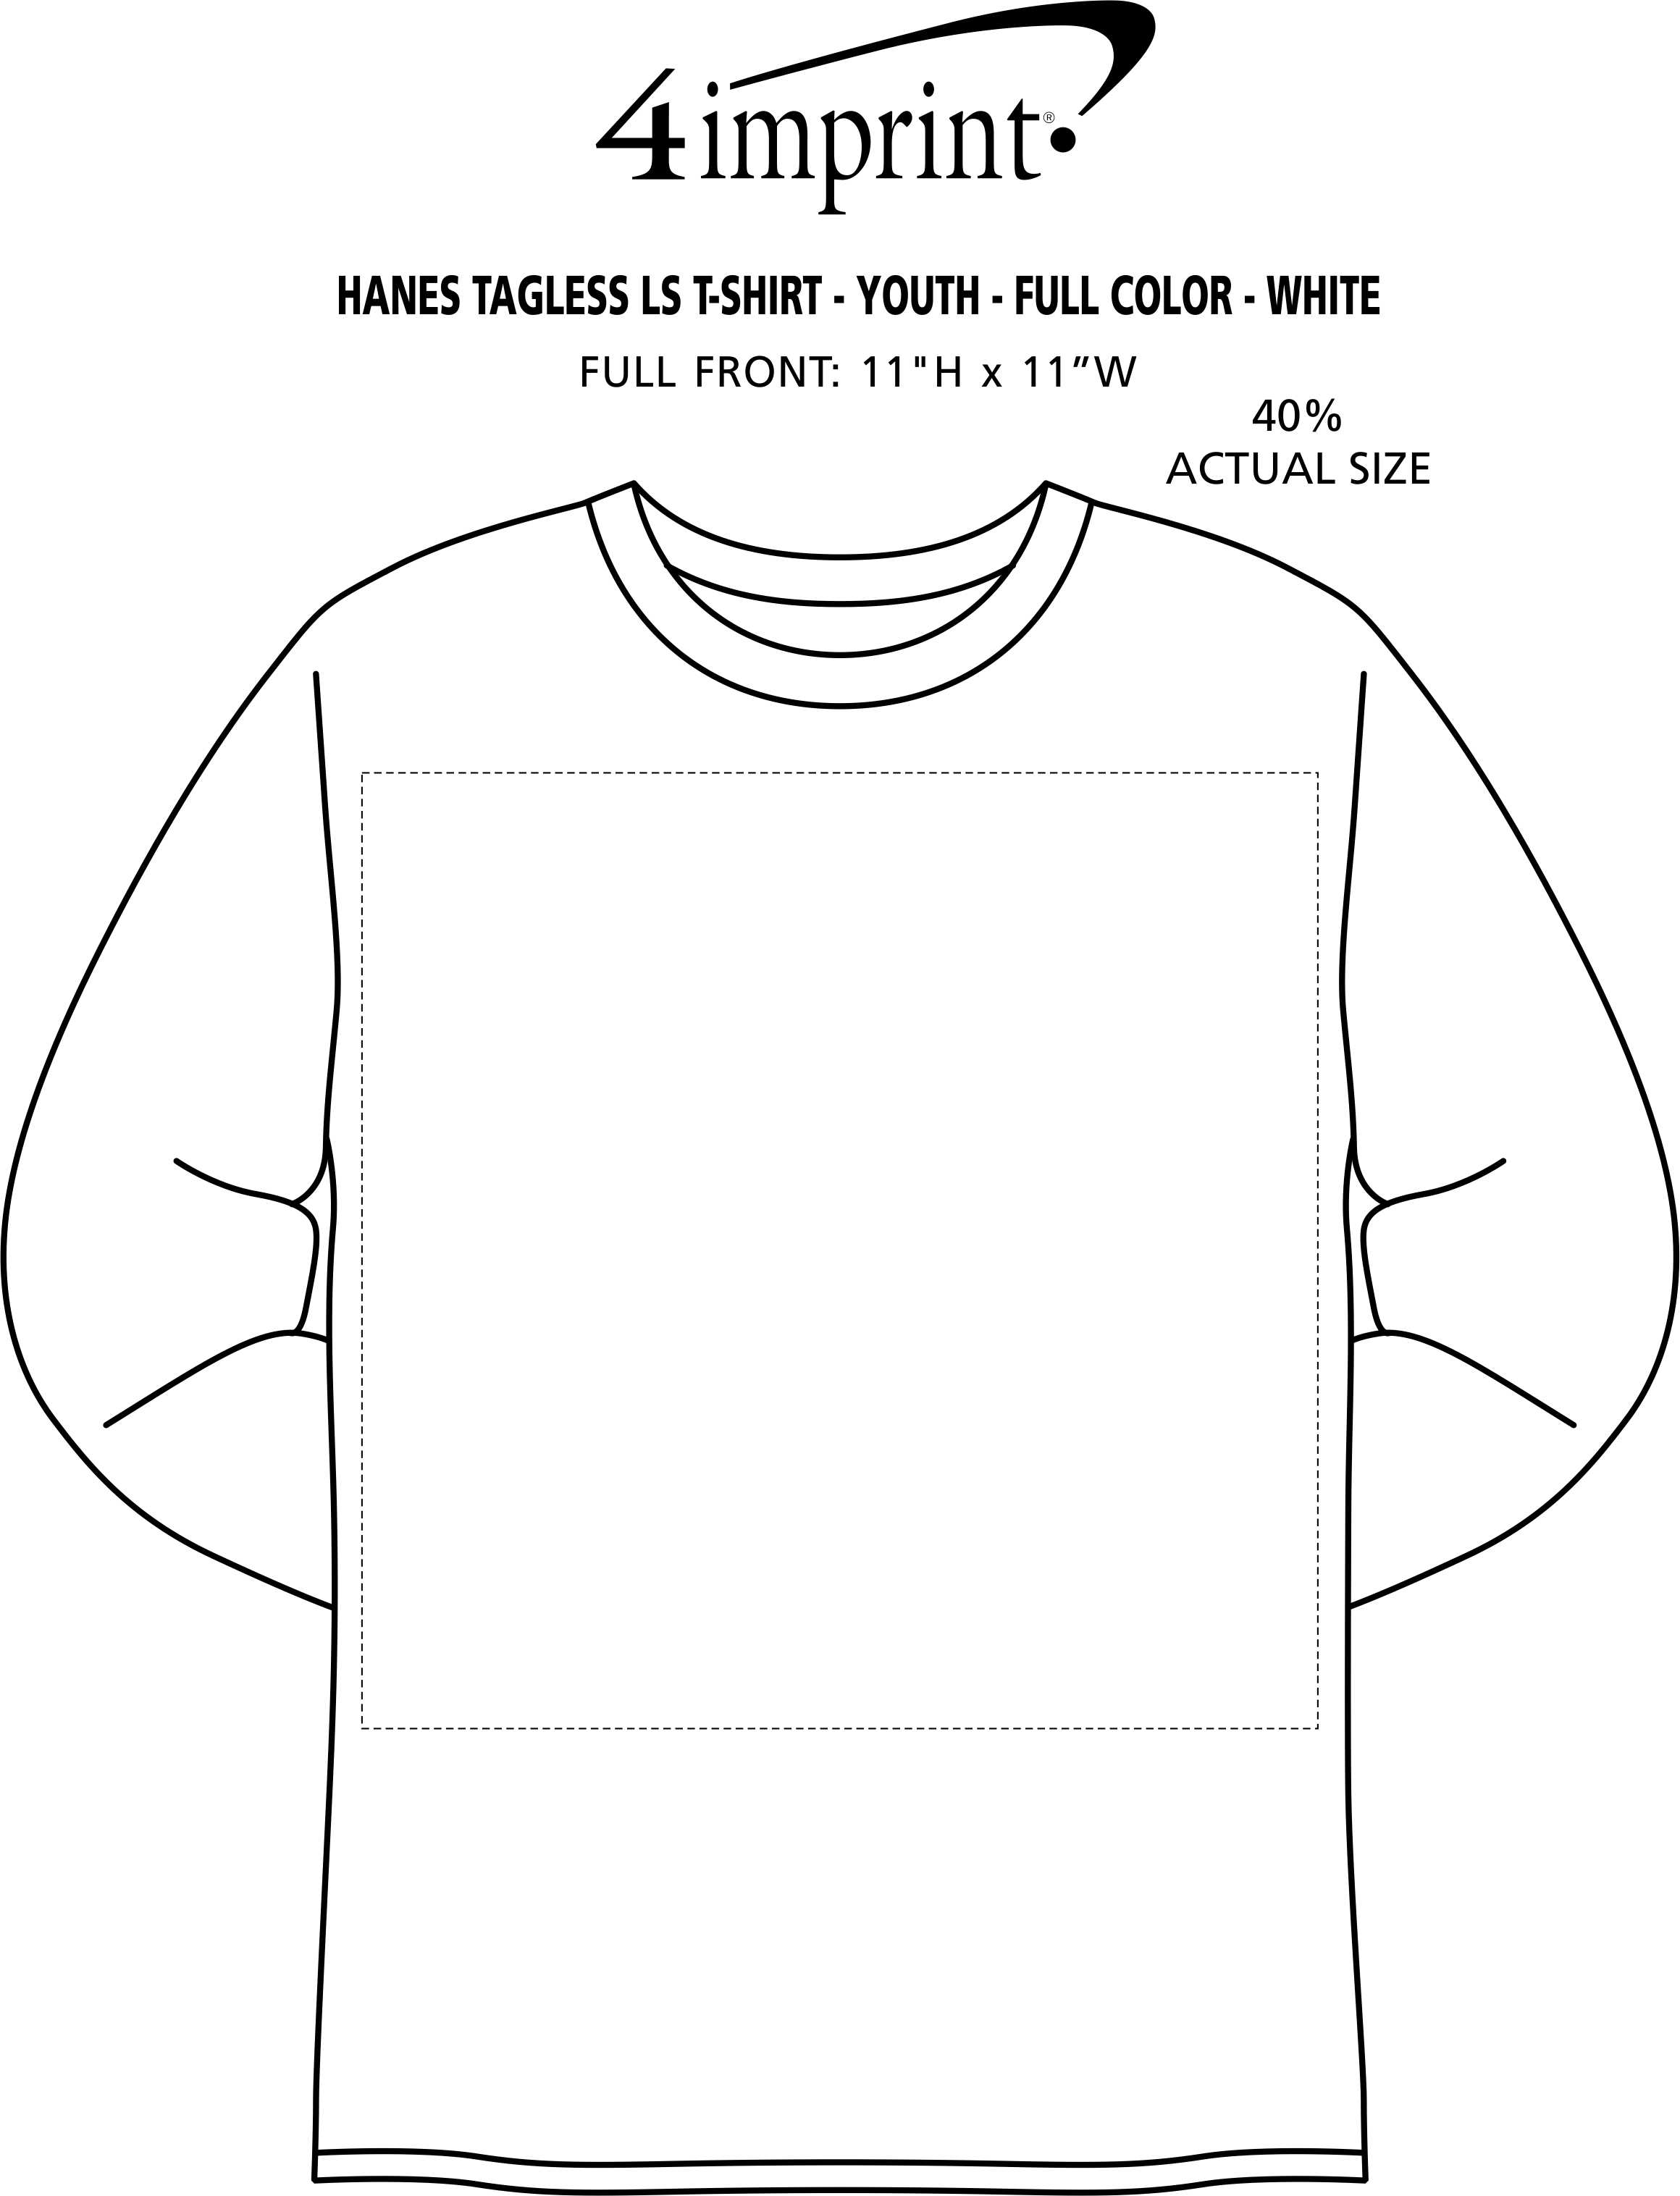 Imprint Area of Hanes Authentic LS T-Shirt - Youth - Full Color - White